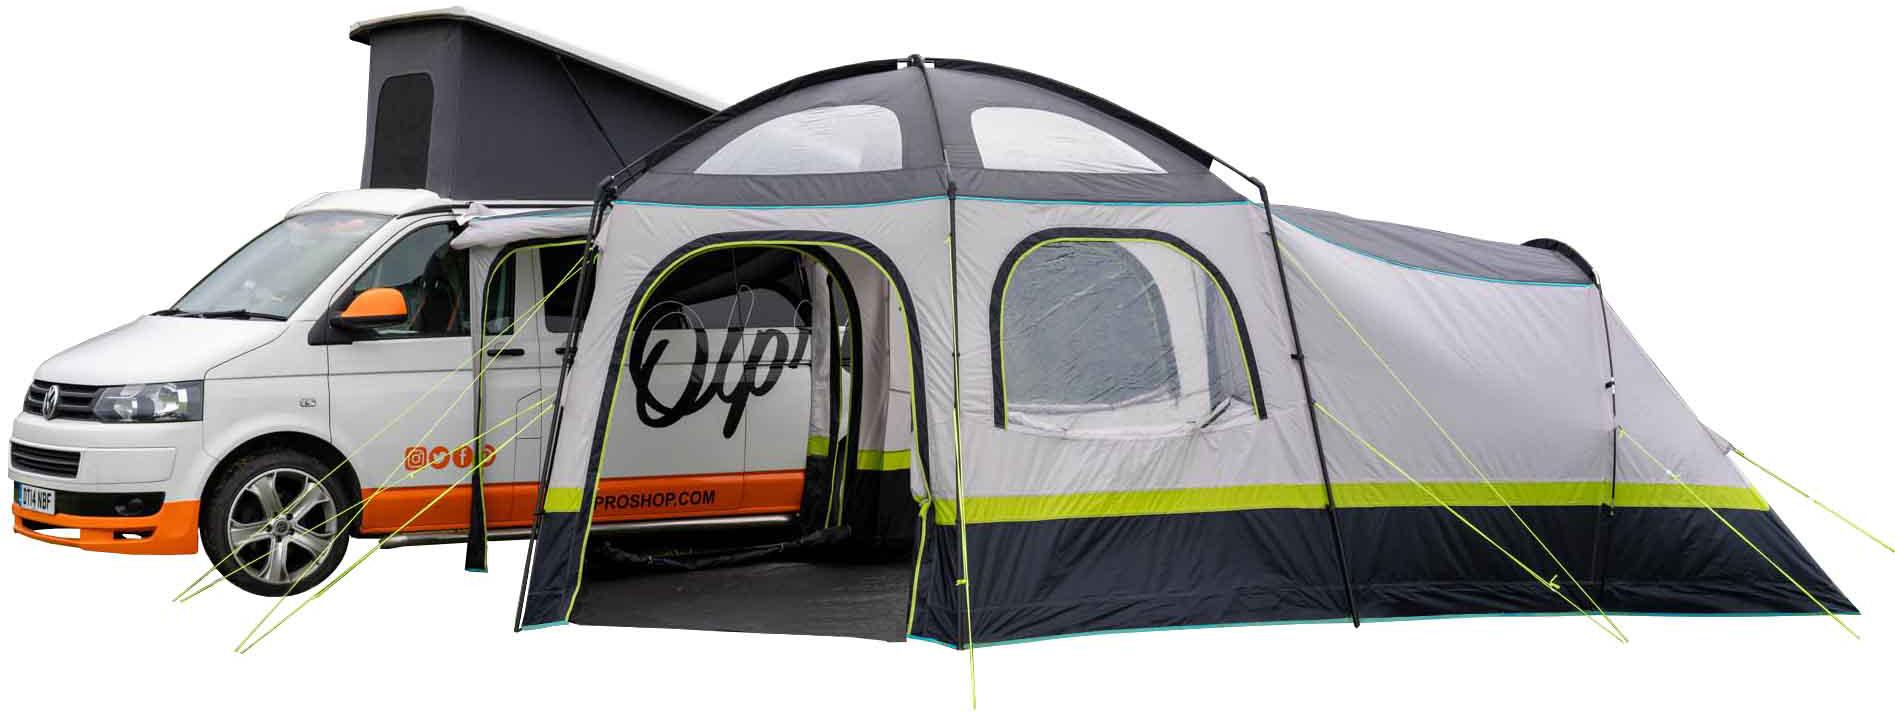 Olpro Hive Campervan Awning (Fibreglass Poles) - With Sleeping Pod